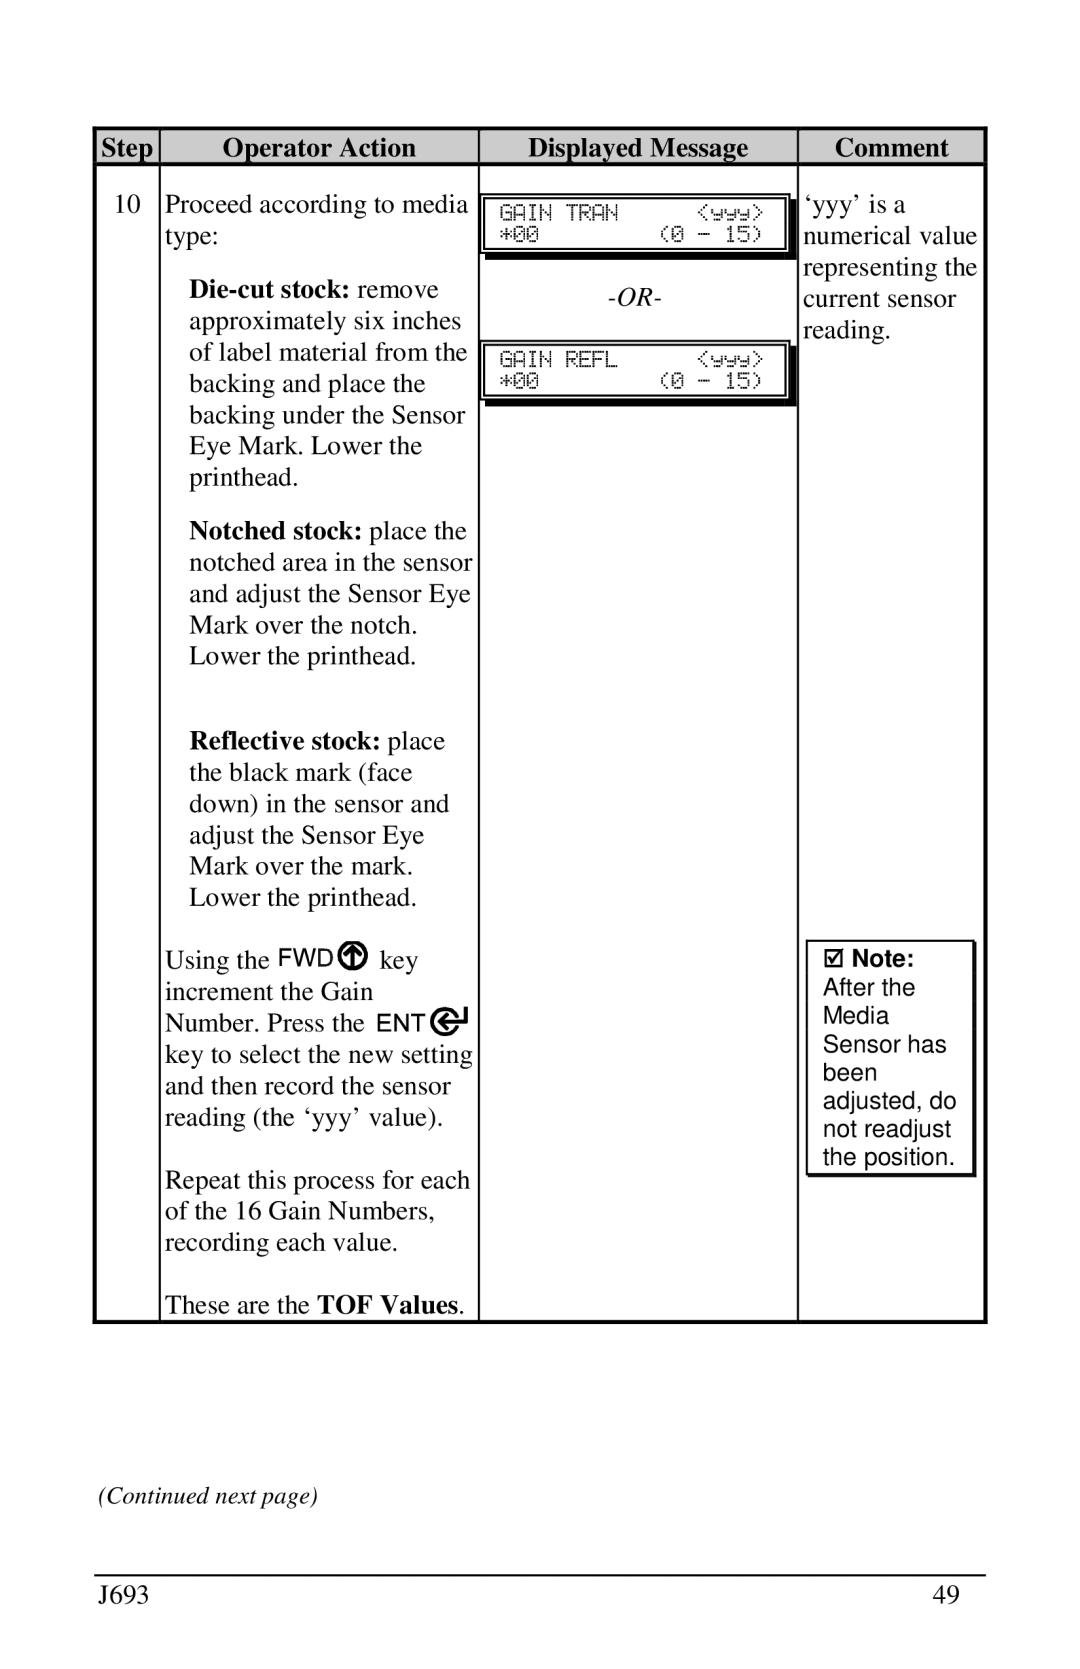 Pitney Bowes J693 manual Jqqhqlrvi, Step, Operator Action, Displayed Message, Comment 